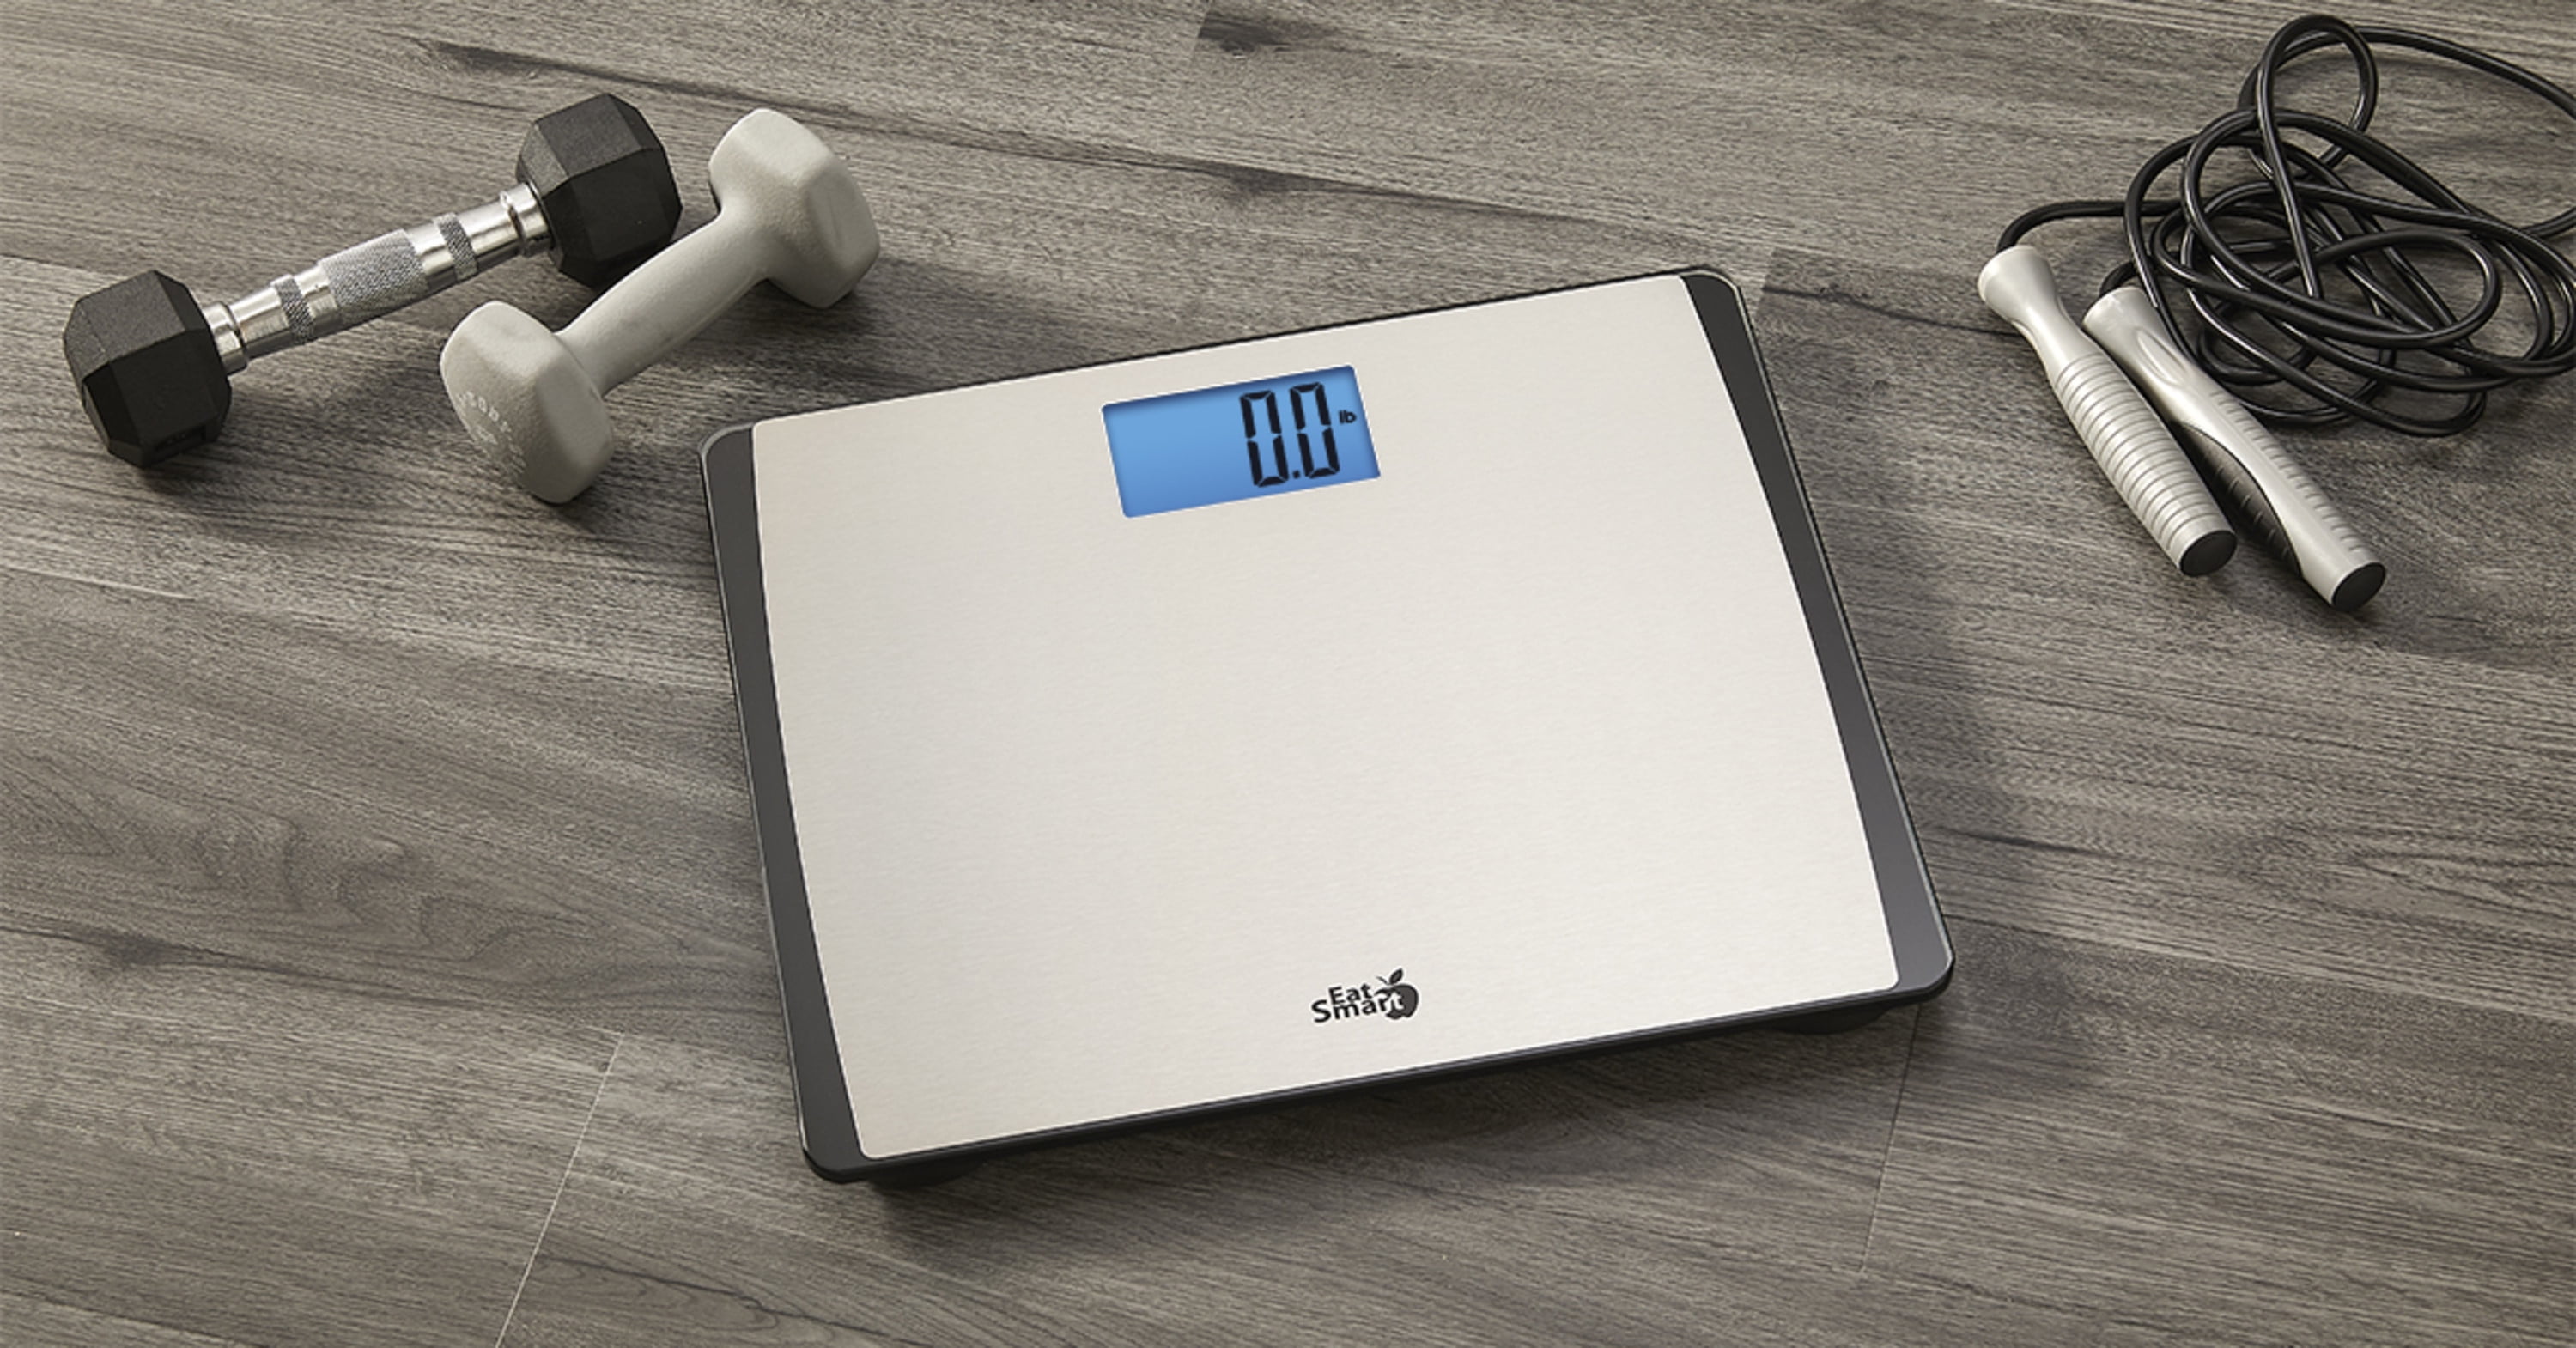  RunSTAR 550lb Bathroom Digital Scale for Body Weight with  Ultra-Wide Platform and Large LCD Display, Accurate High Precision Scale  with Extra-High Capacity, FSA HSA Eligible : Health & Household